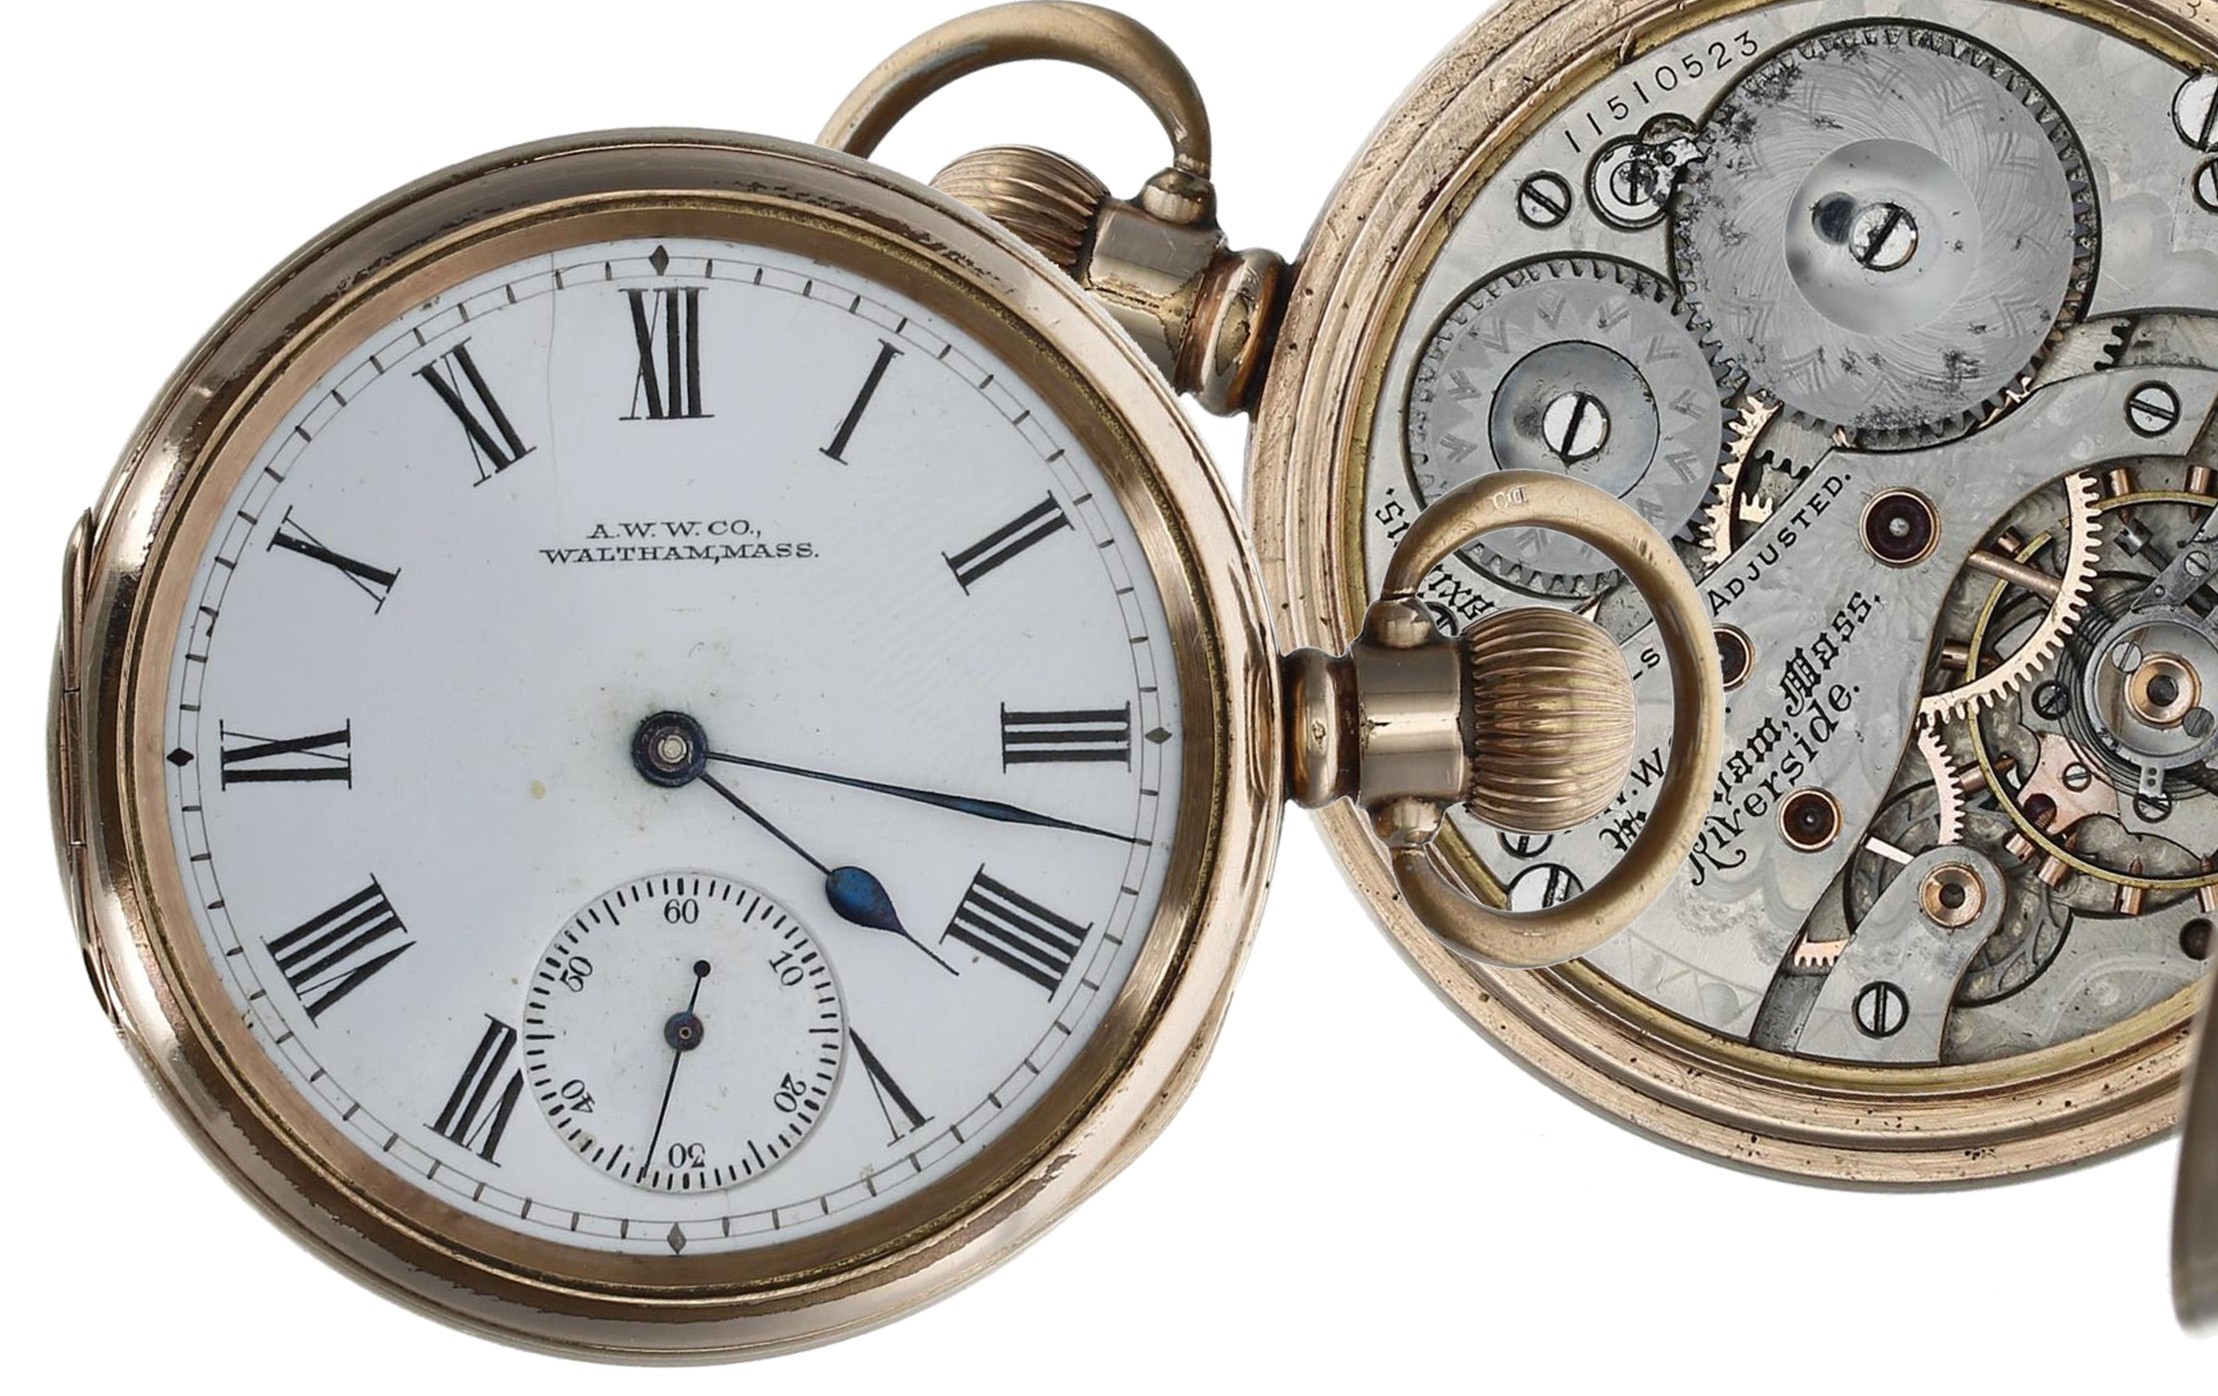 American Waltham 'Riverside Maximus' gold plated lever pocket watch, circa 1902, serial no.